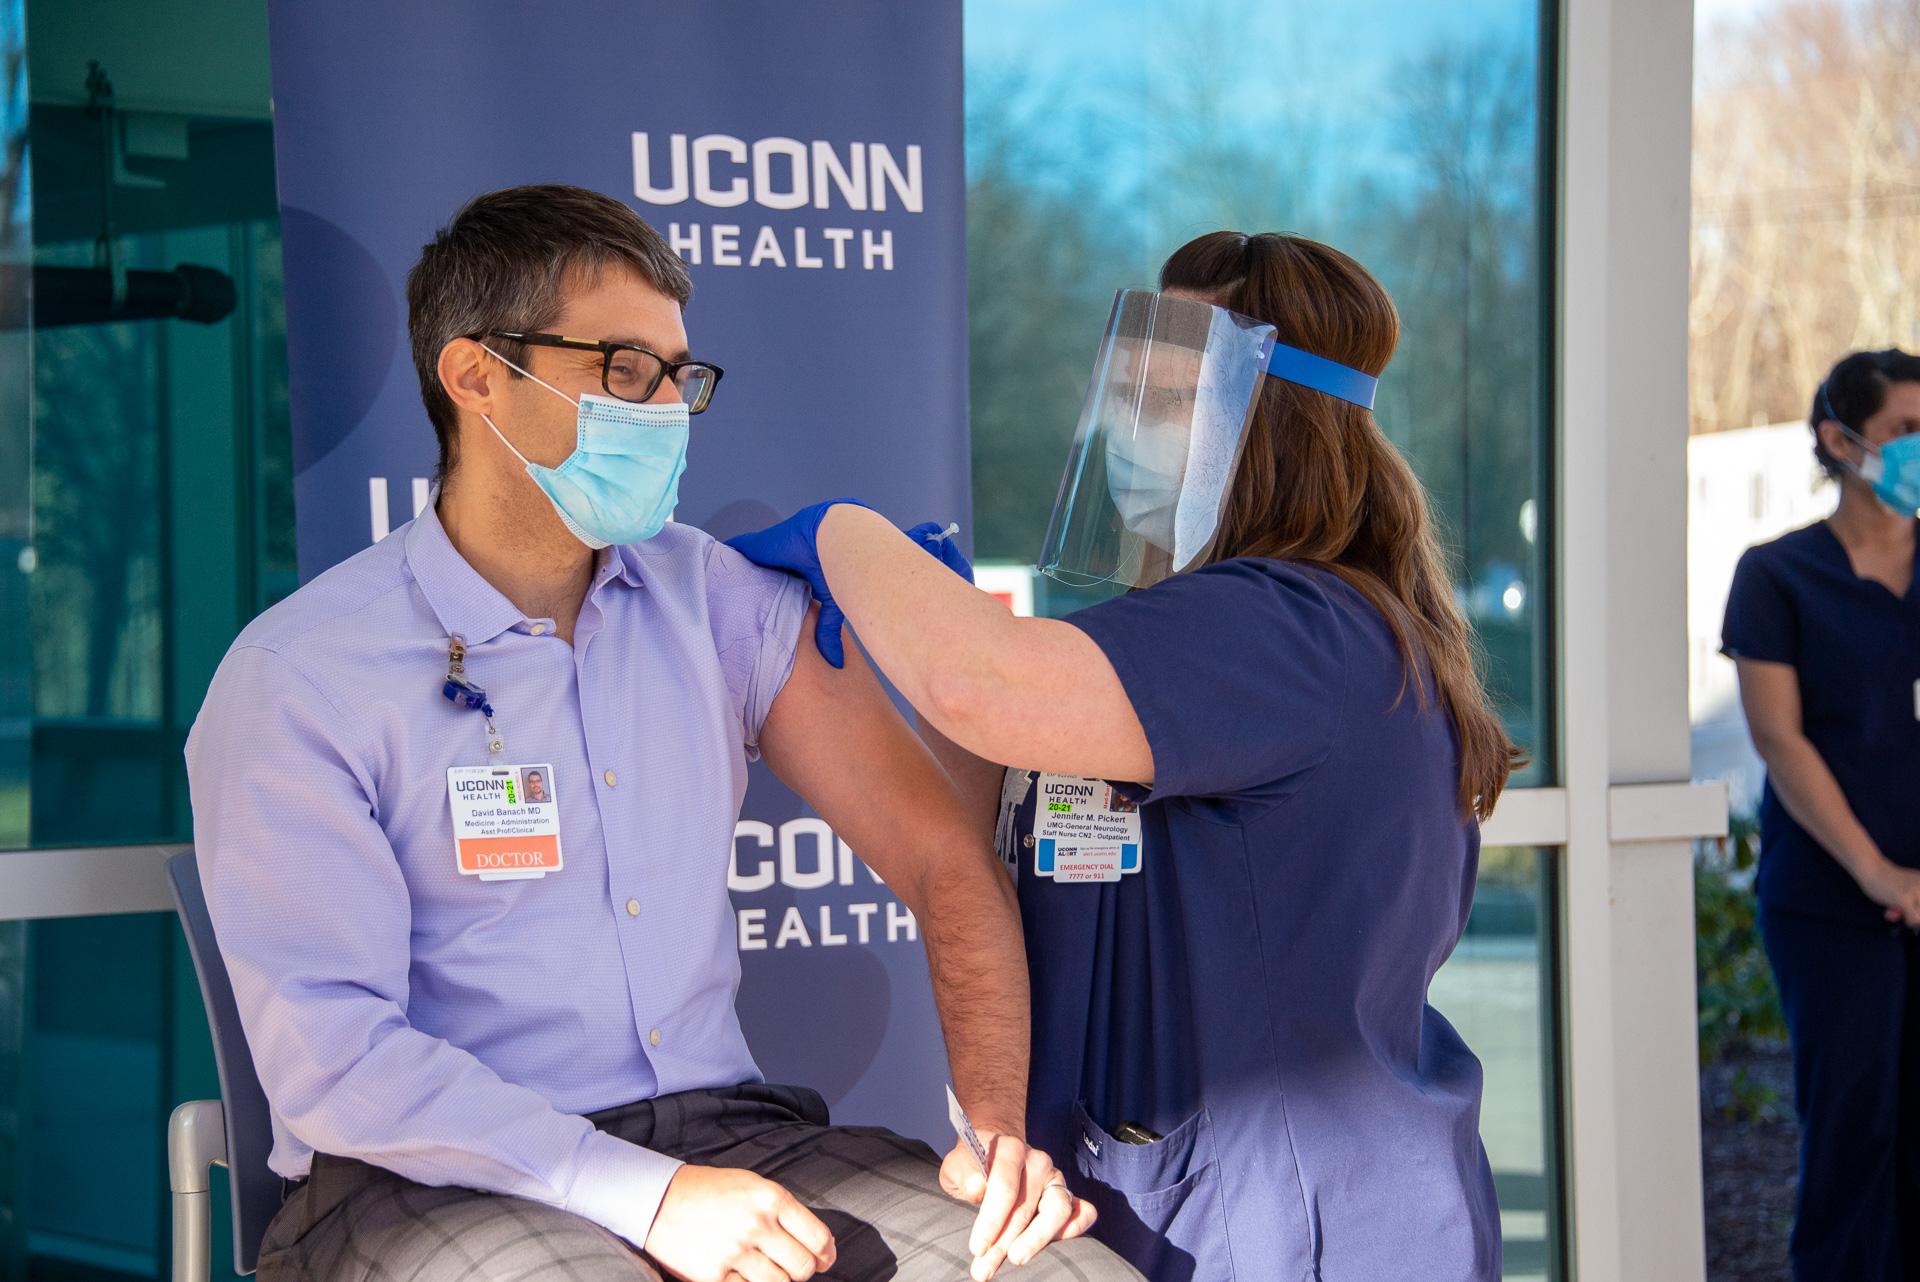 Dr. David Banach gets vaccinated for COVID-19 by staff nurse Jennifer Pickert on December 15, 2020.